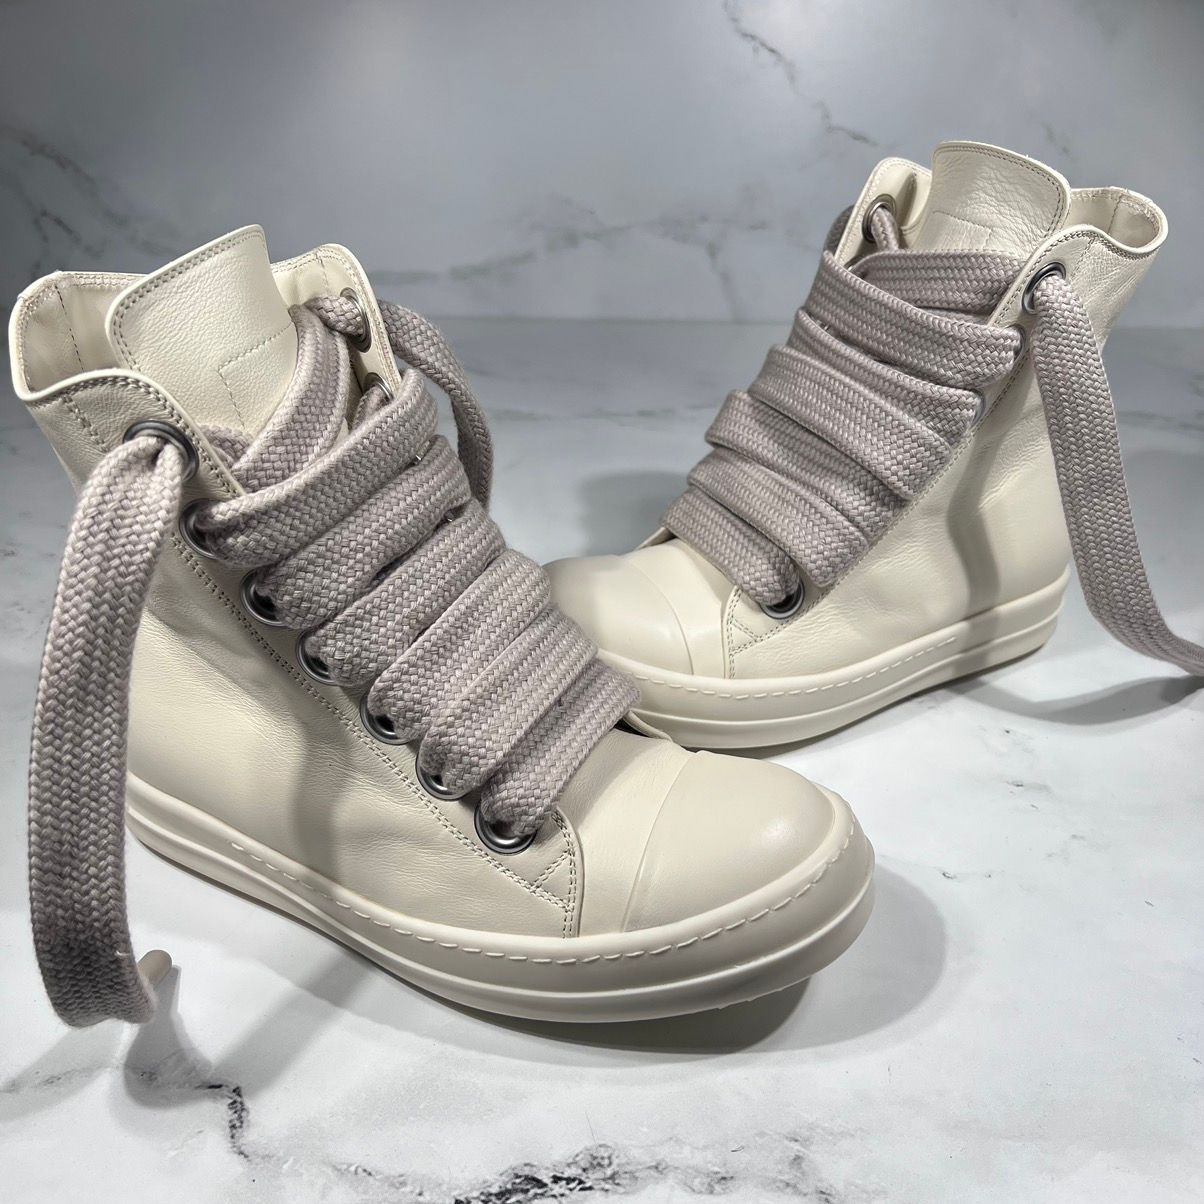 Rick Owens Rick Owens Ramones Milk Leather Thick Lace High Top Sneakers Size US 7 / IT 37 - 1 Preview